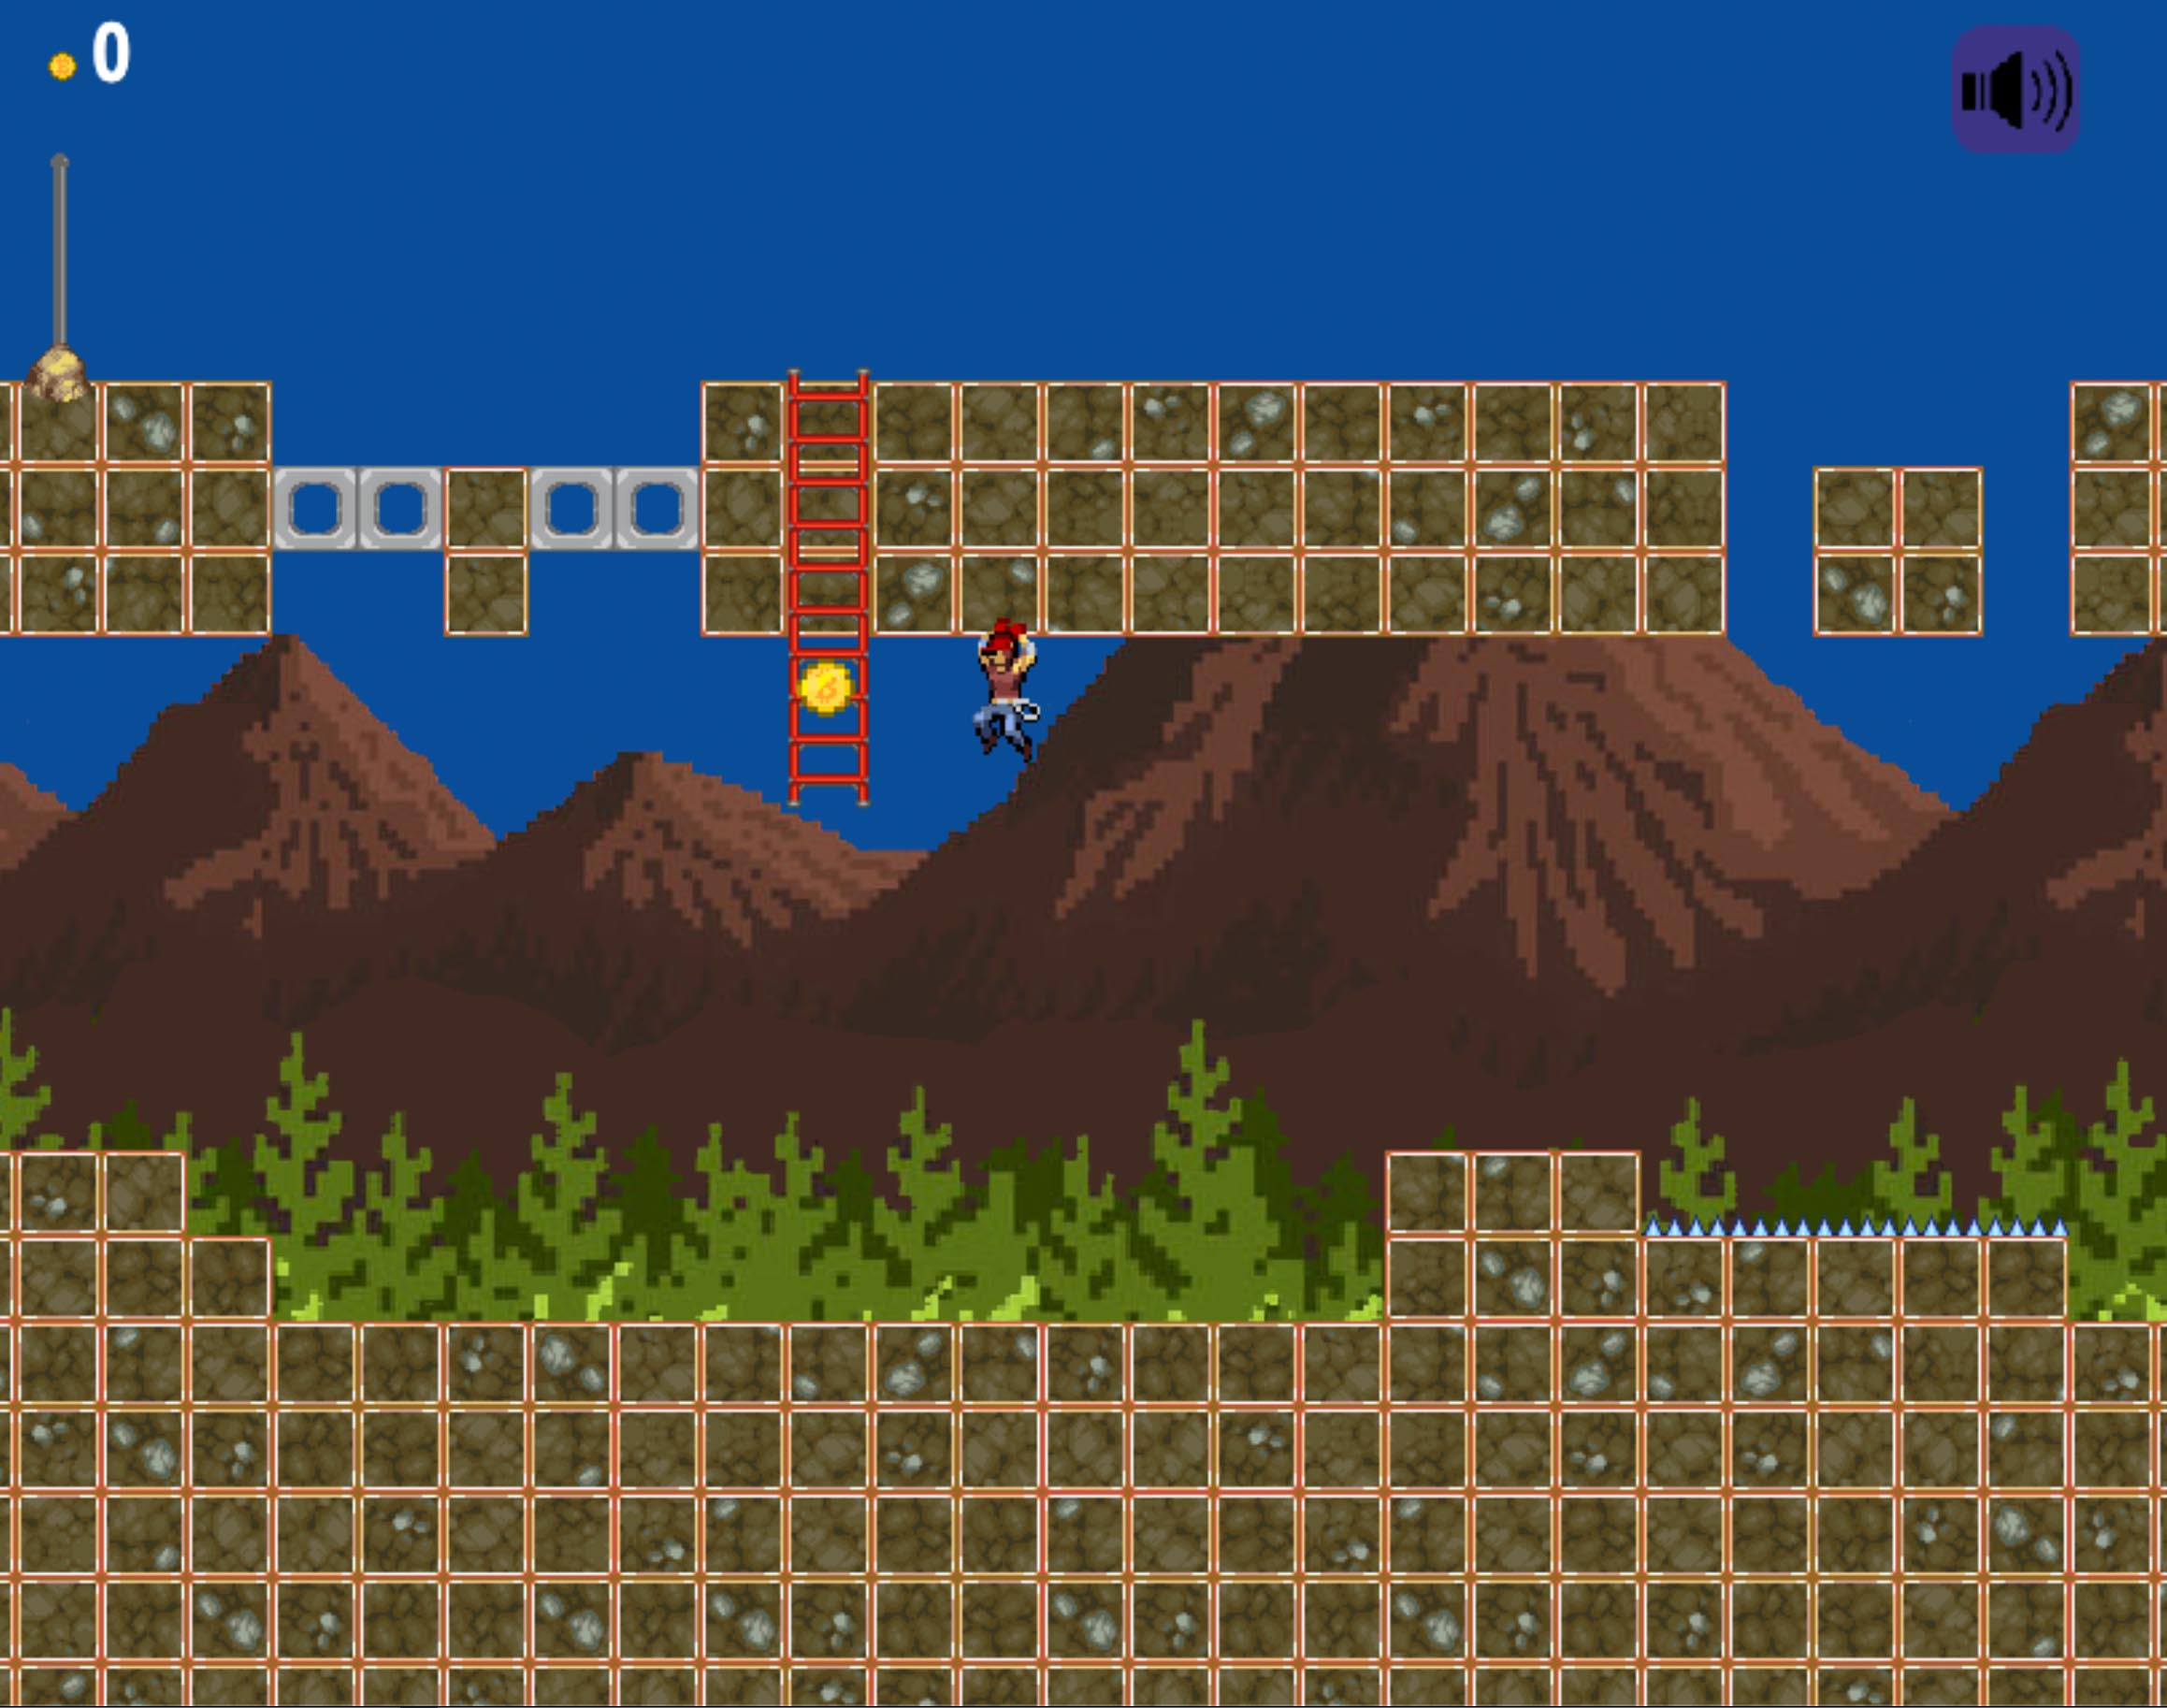 This is a screenshot from Context Clues Climber. The player is hanging from the ceiling and about to collect a coin.